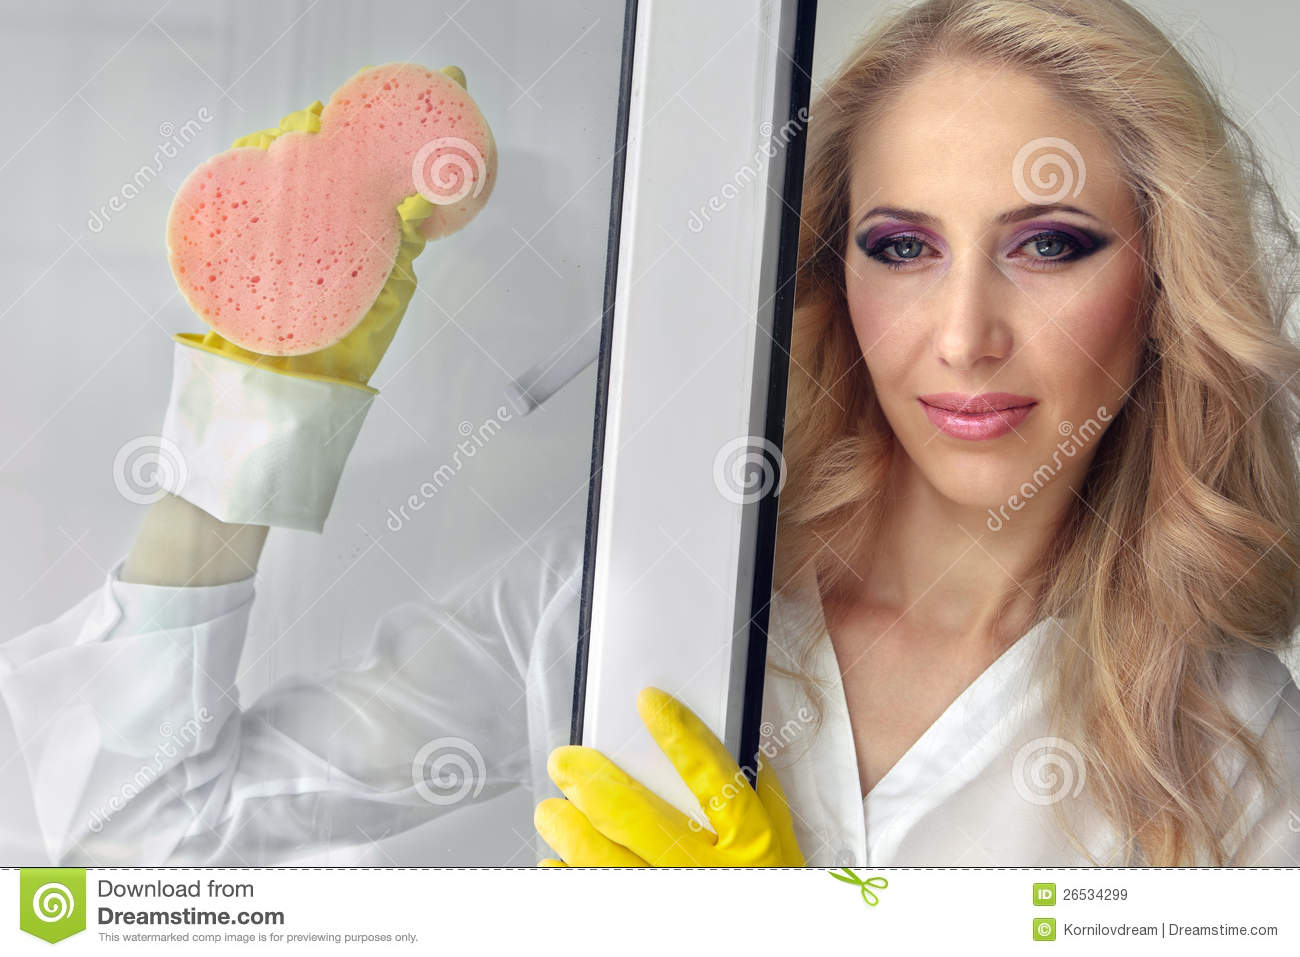 Womanl Washing The Window Royalty Free Stock Images   Image  26534299